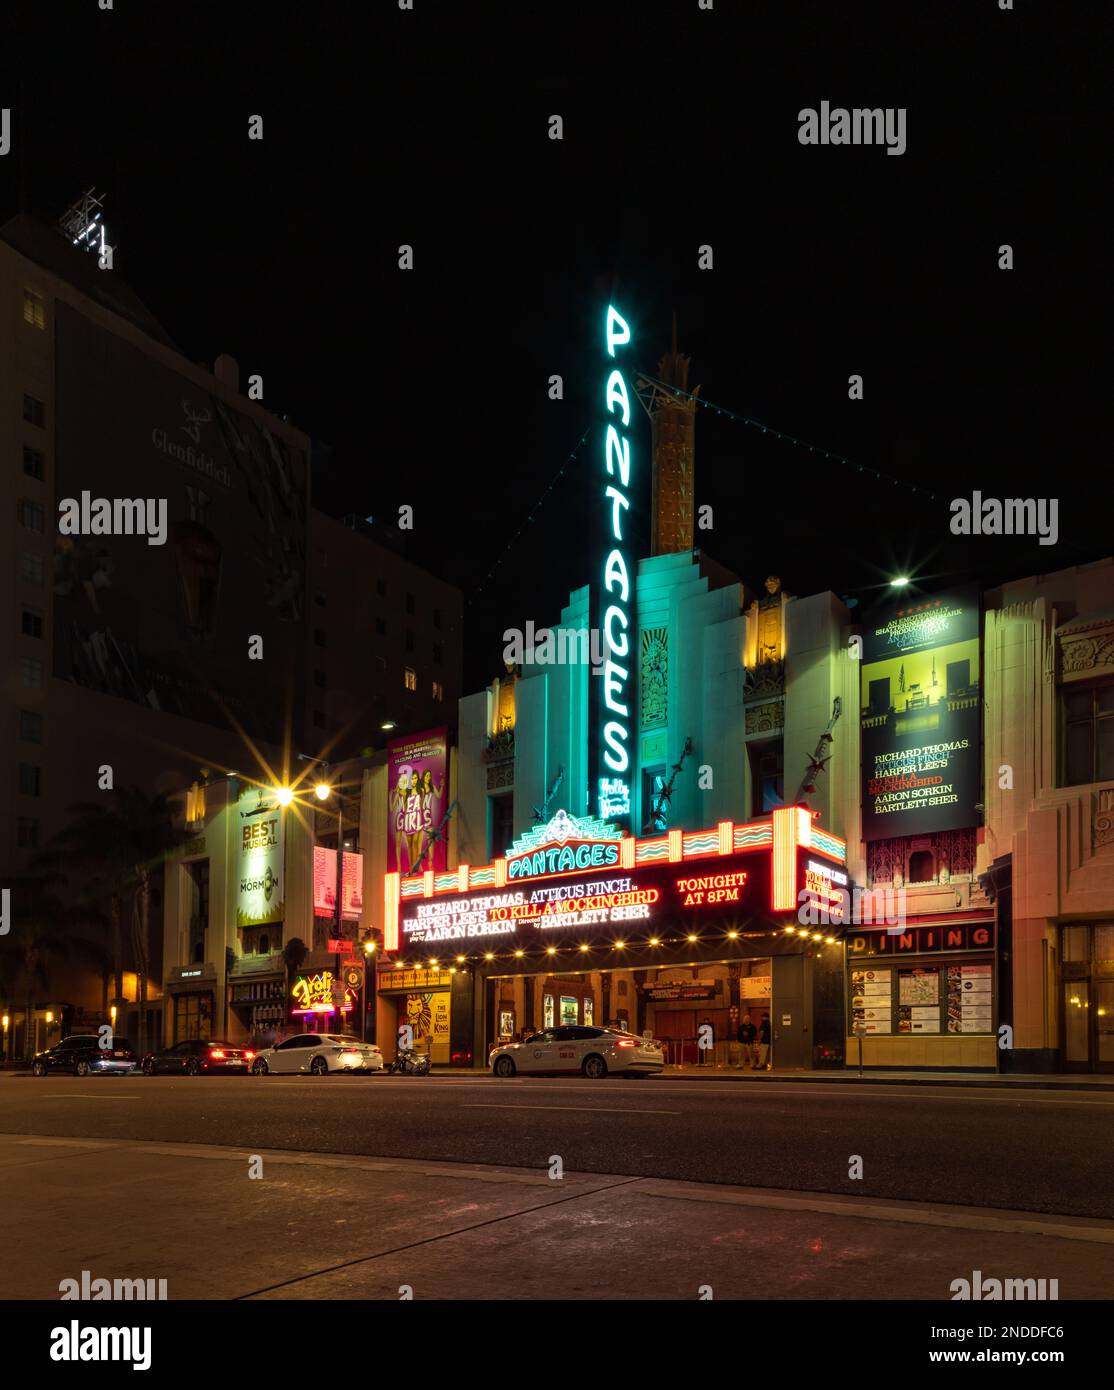 A picture of the Hollywood Pantages Theatre at night. Stock Photo